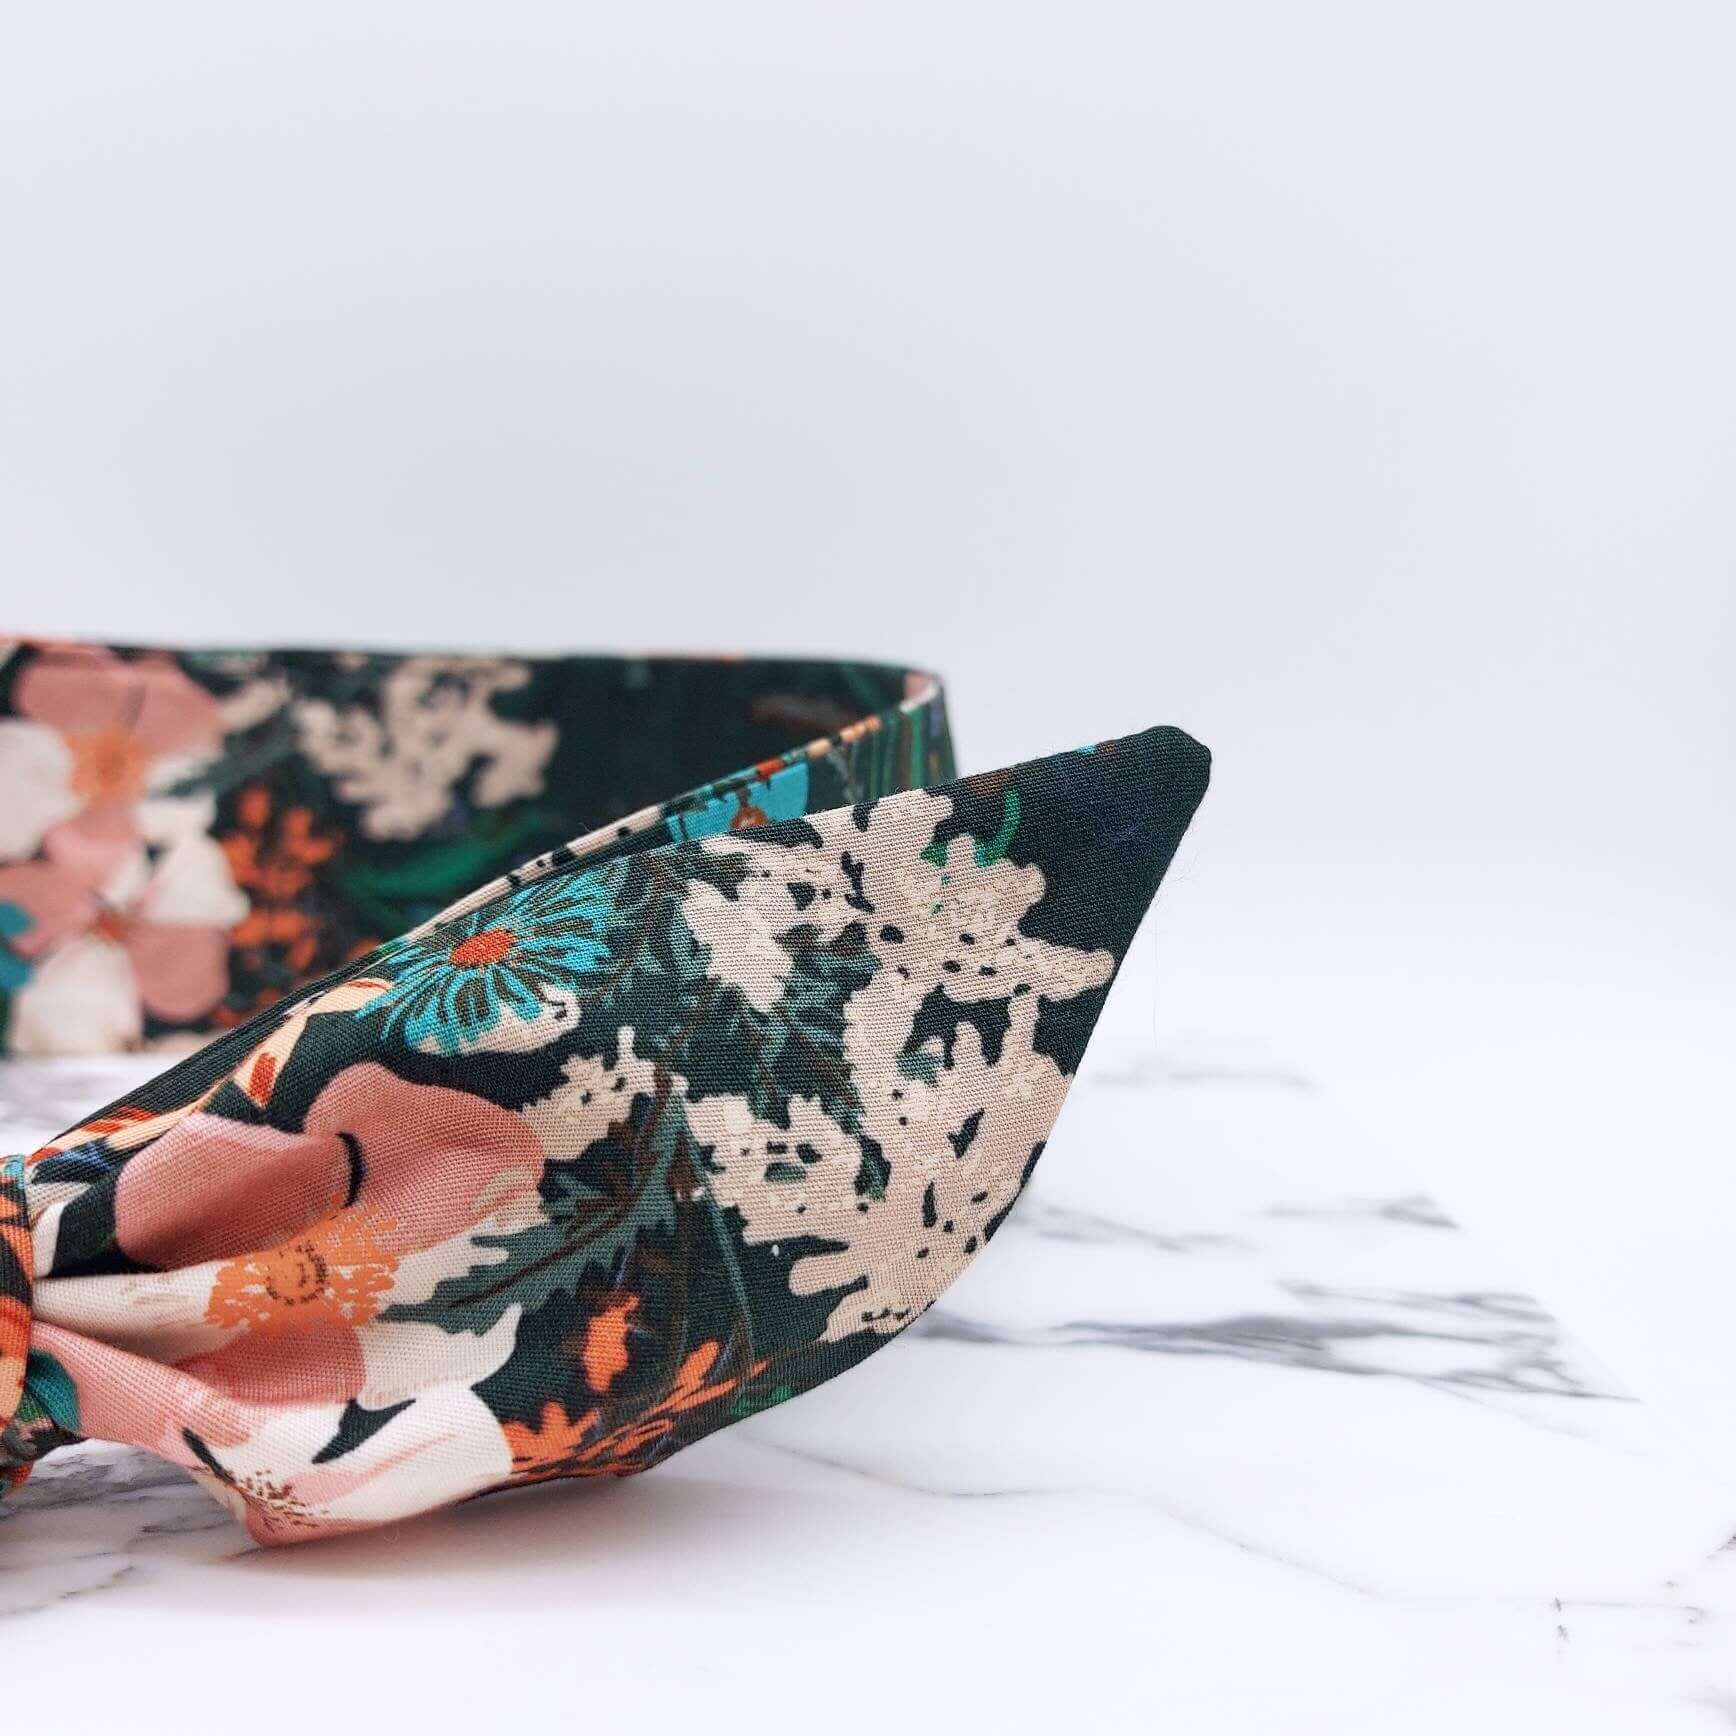 A dark green, floral cotton headscarf with pale pink, blue and orange flowers, tied in a pretty knot.